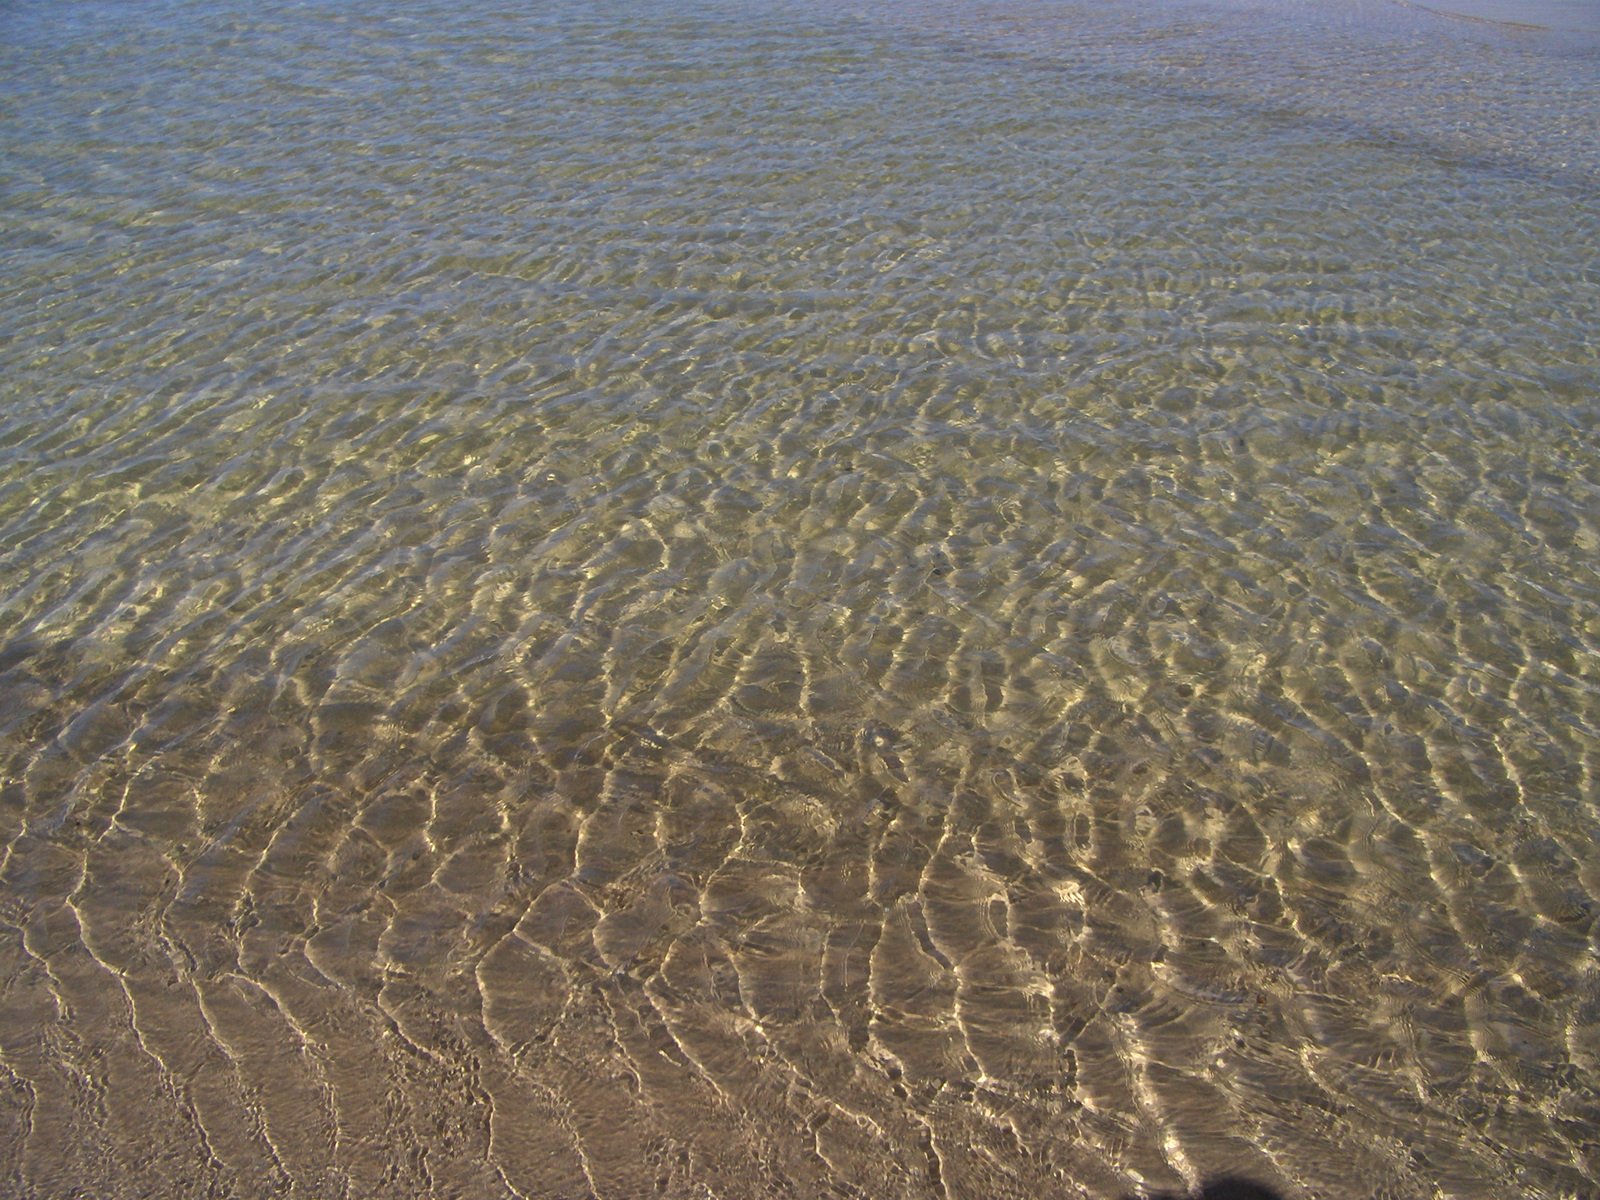 a sandy shore at the edge of the water